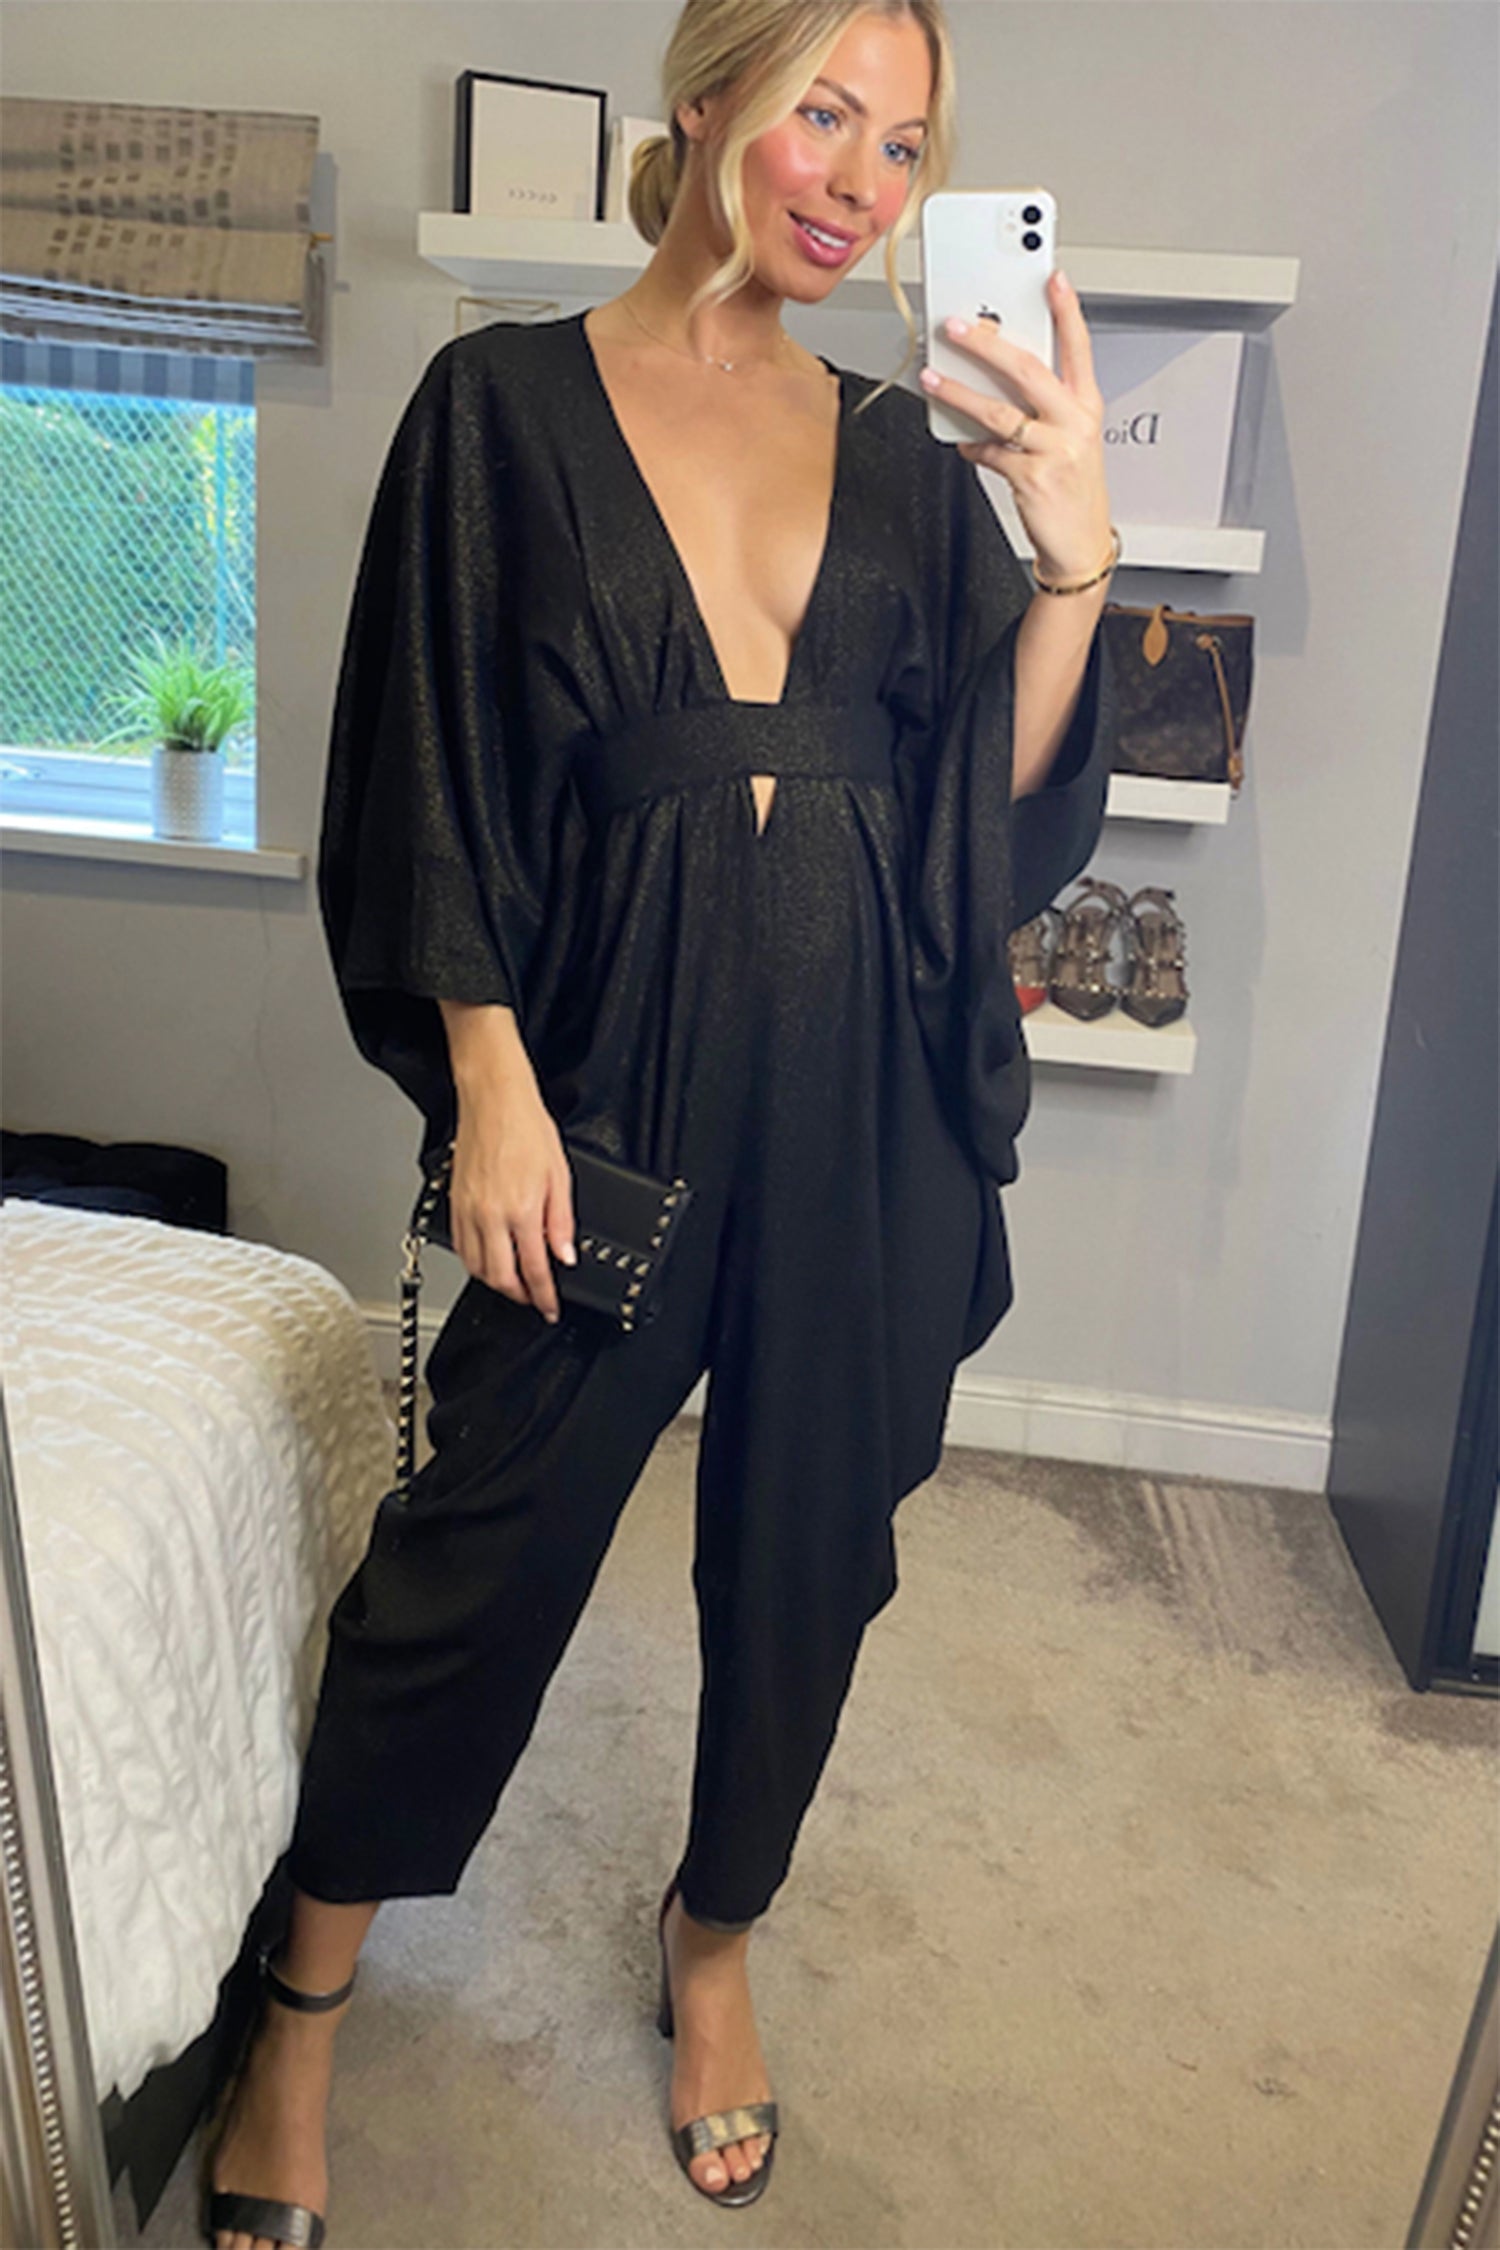 Mina Jumpsuit in black and gold sparkle